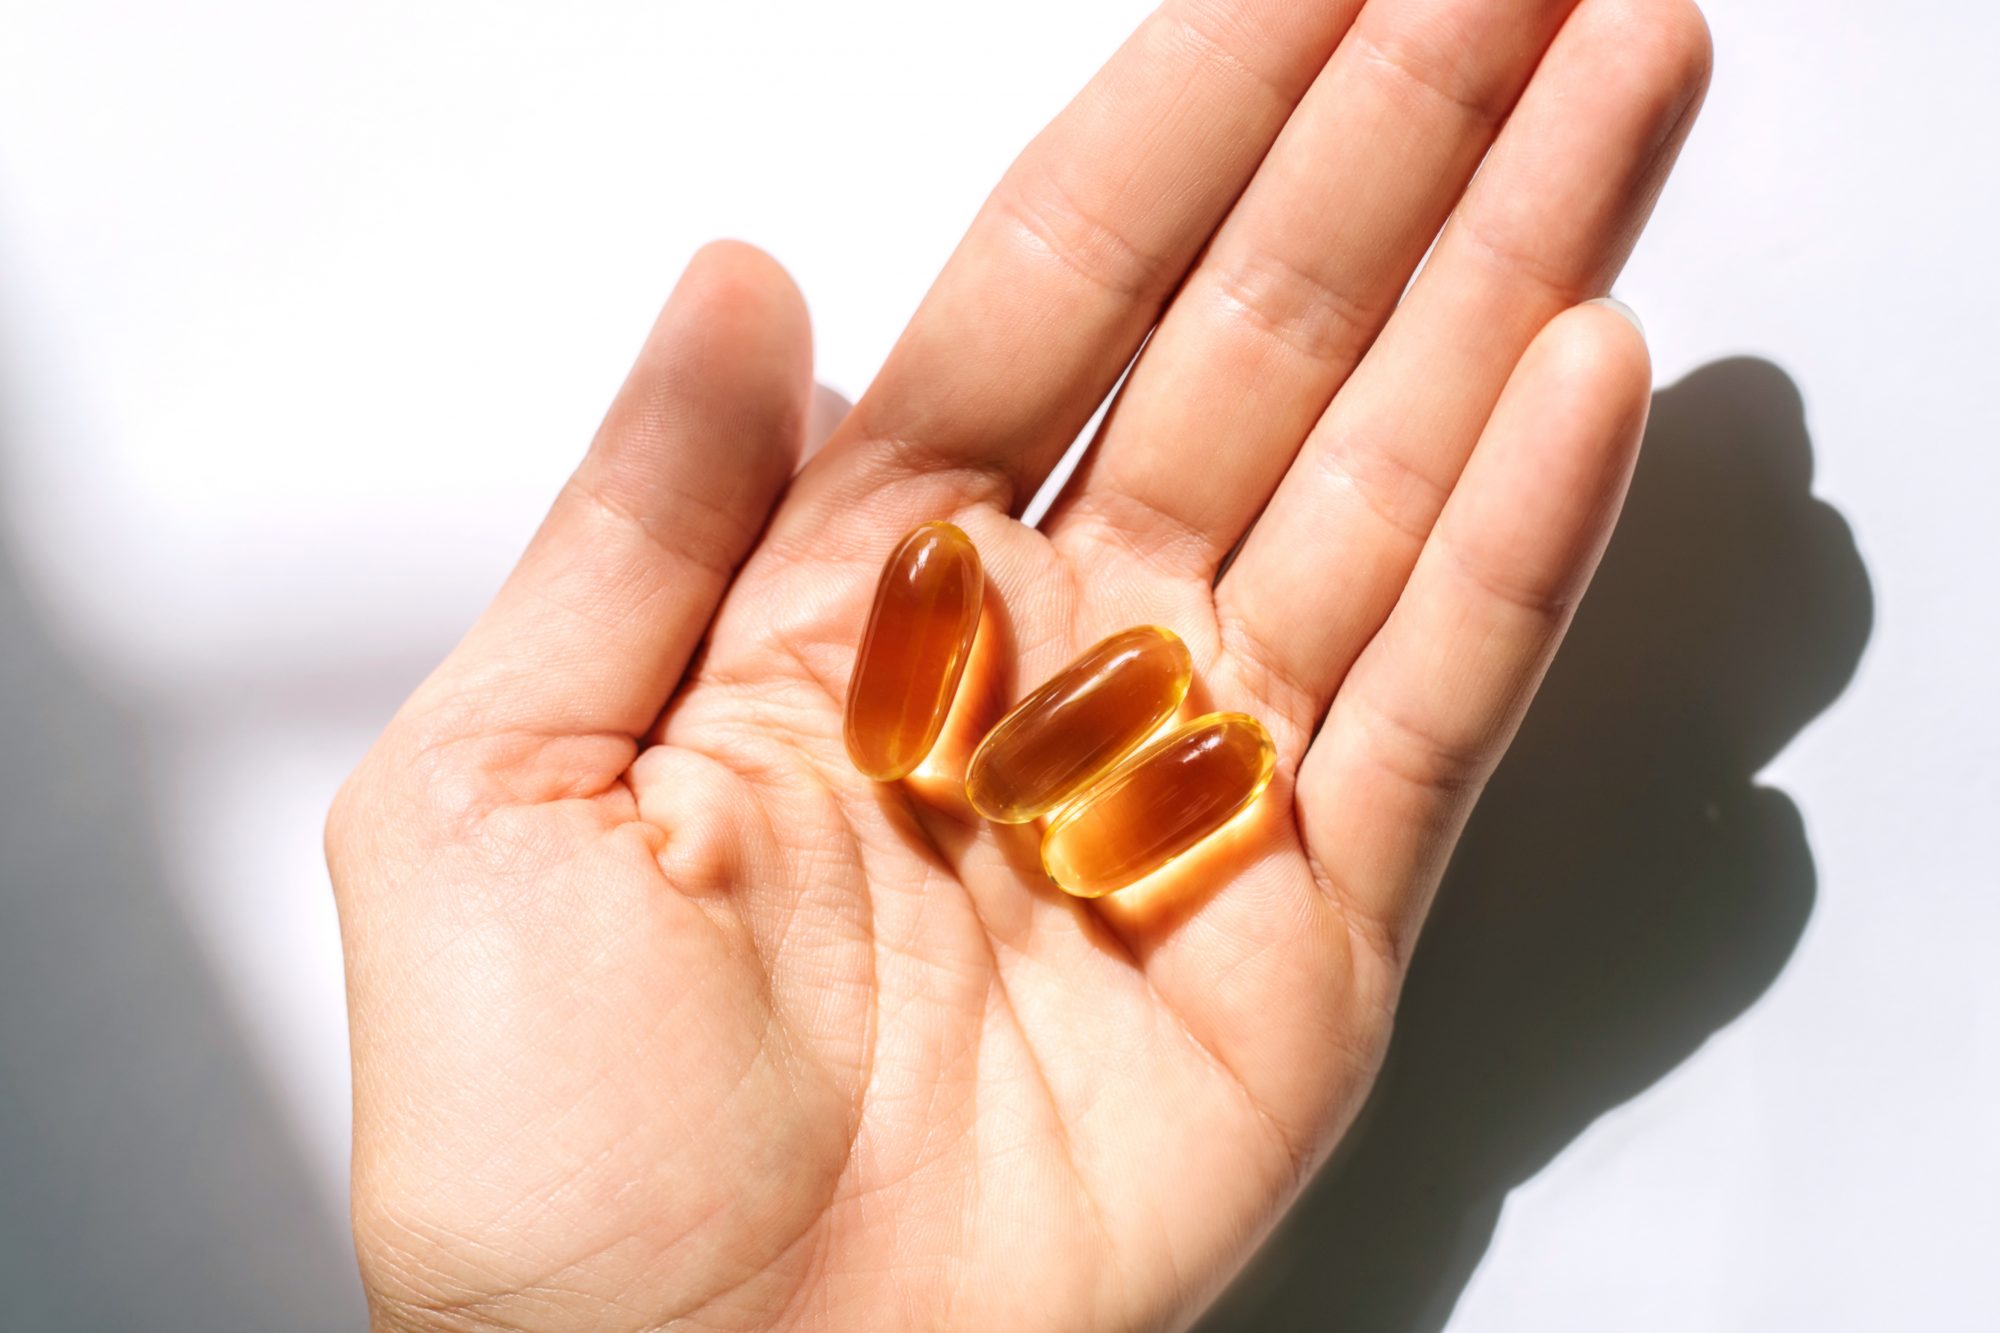 How to Choose the Right Hair Growth Vitamins